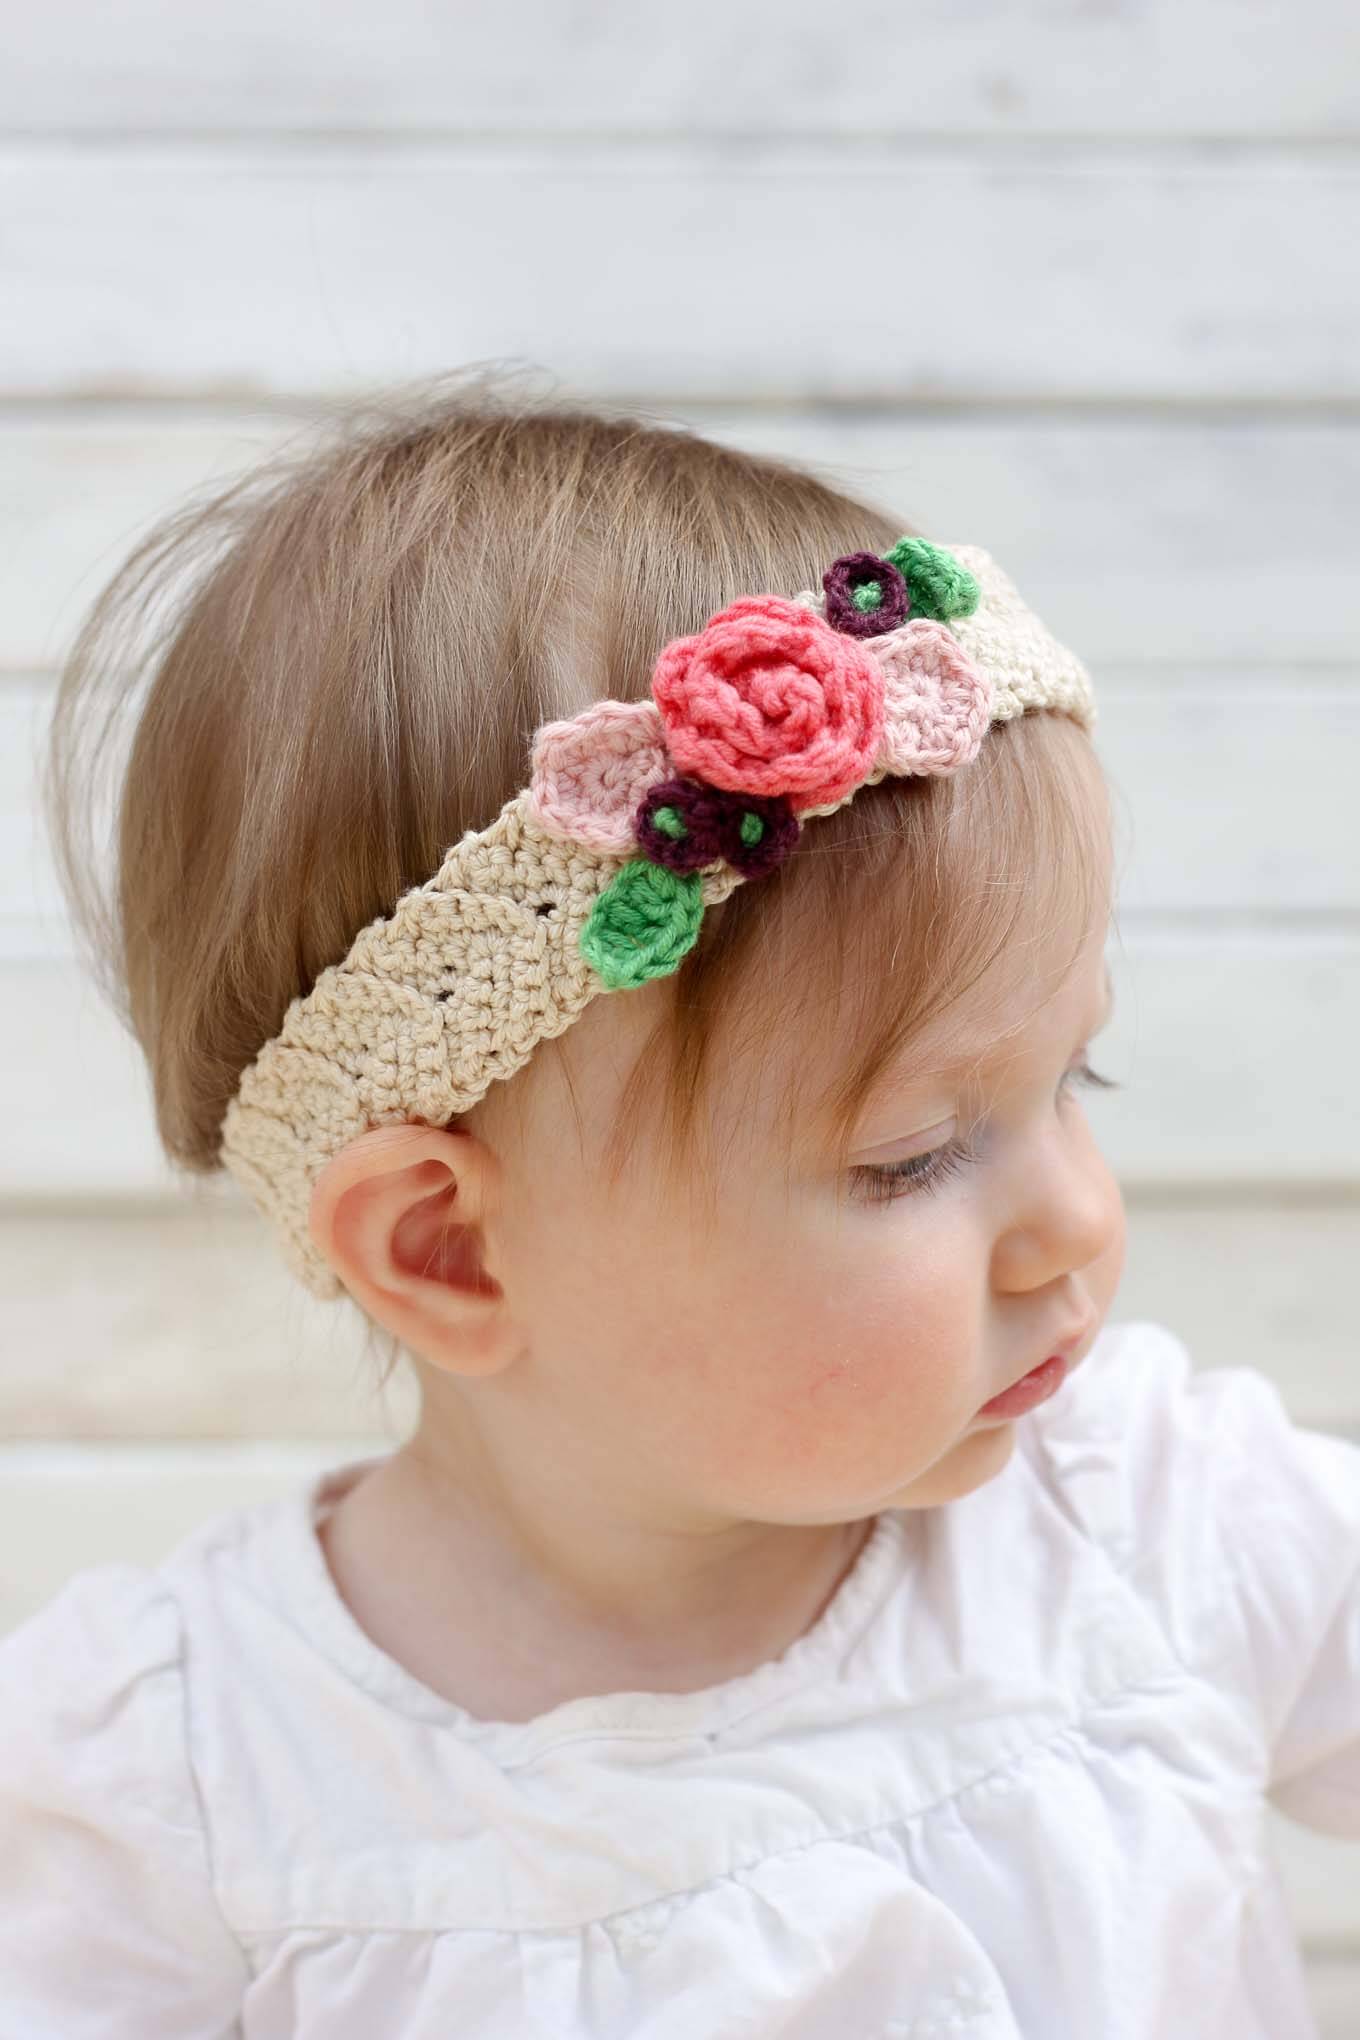 Spring Has Sprung Flower Headband - This list of unique crochet baby headbands for girls are sweet and simple. You can whip these free crochet patterns up in no time, and there are so many options. #CrochetBabyHeadbands #BabyHeadbandPatterns #FreeCrochetPattern